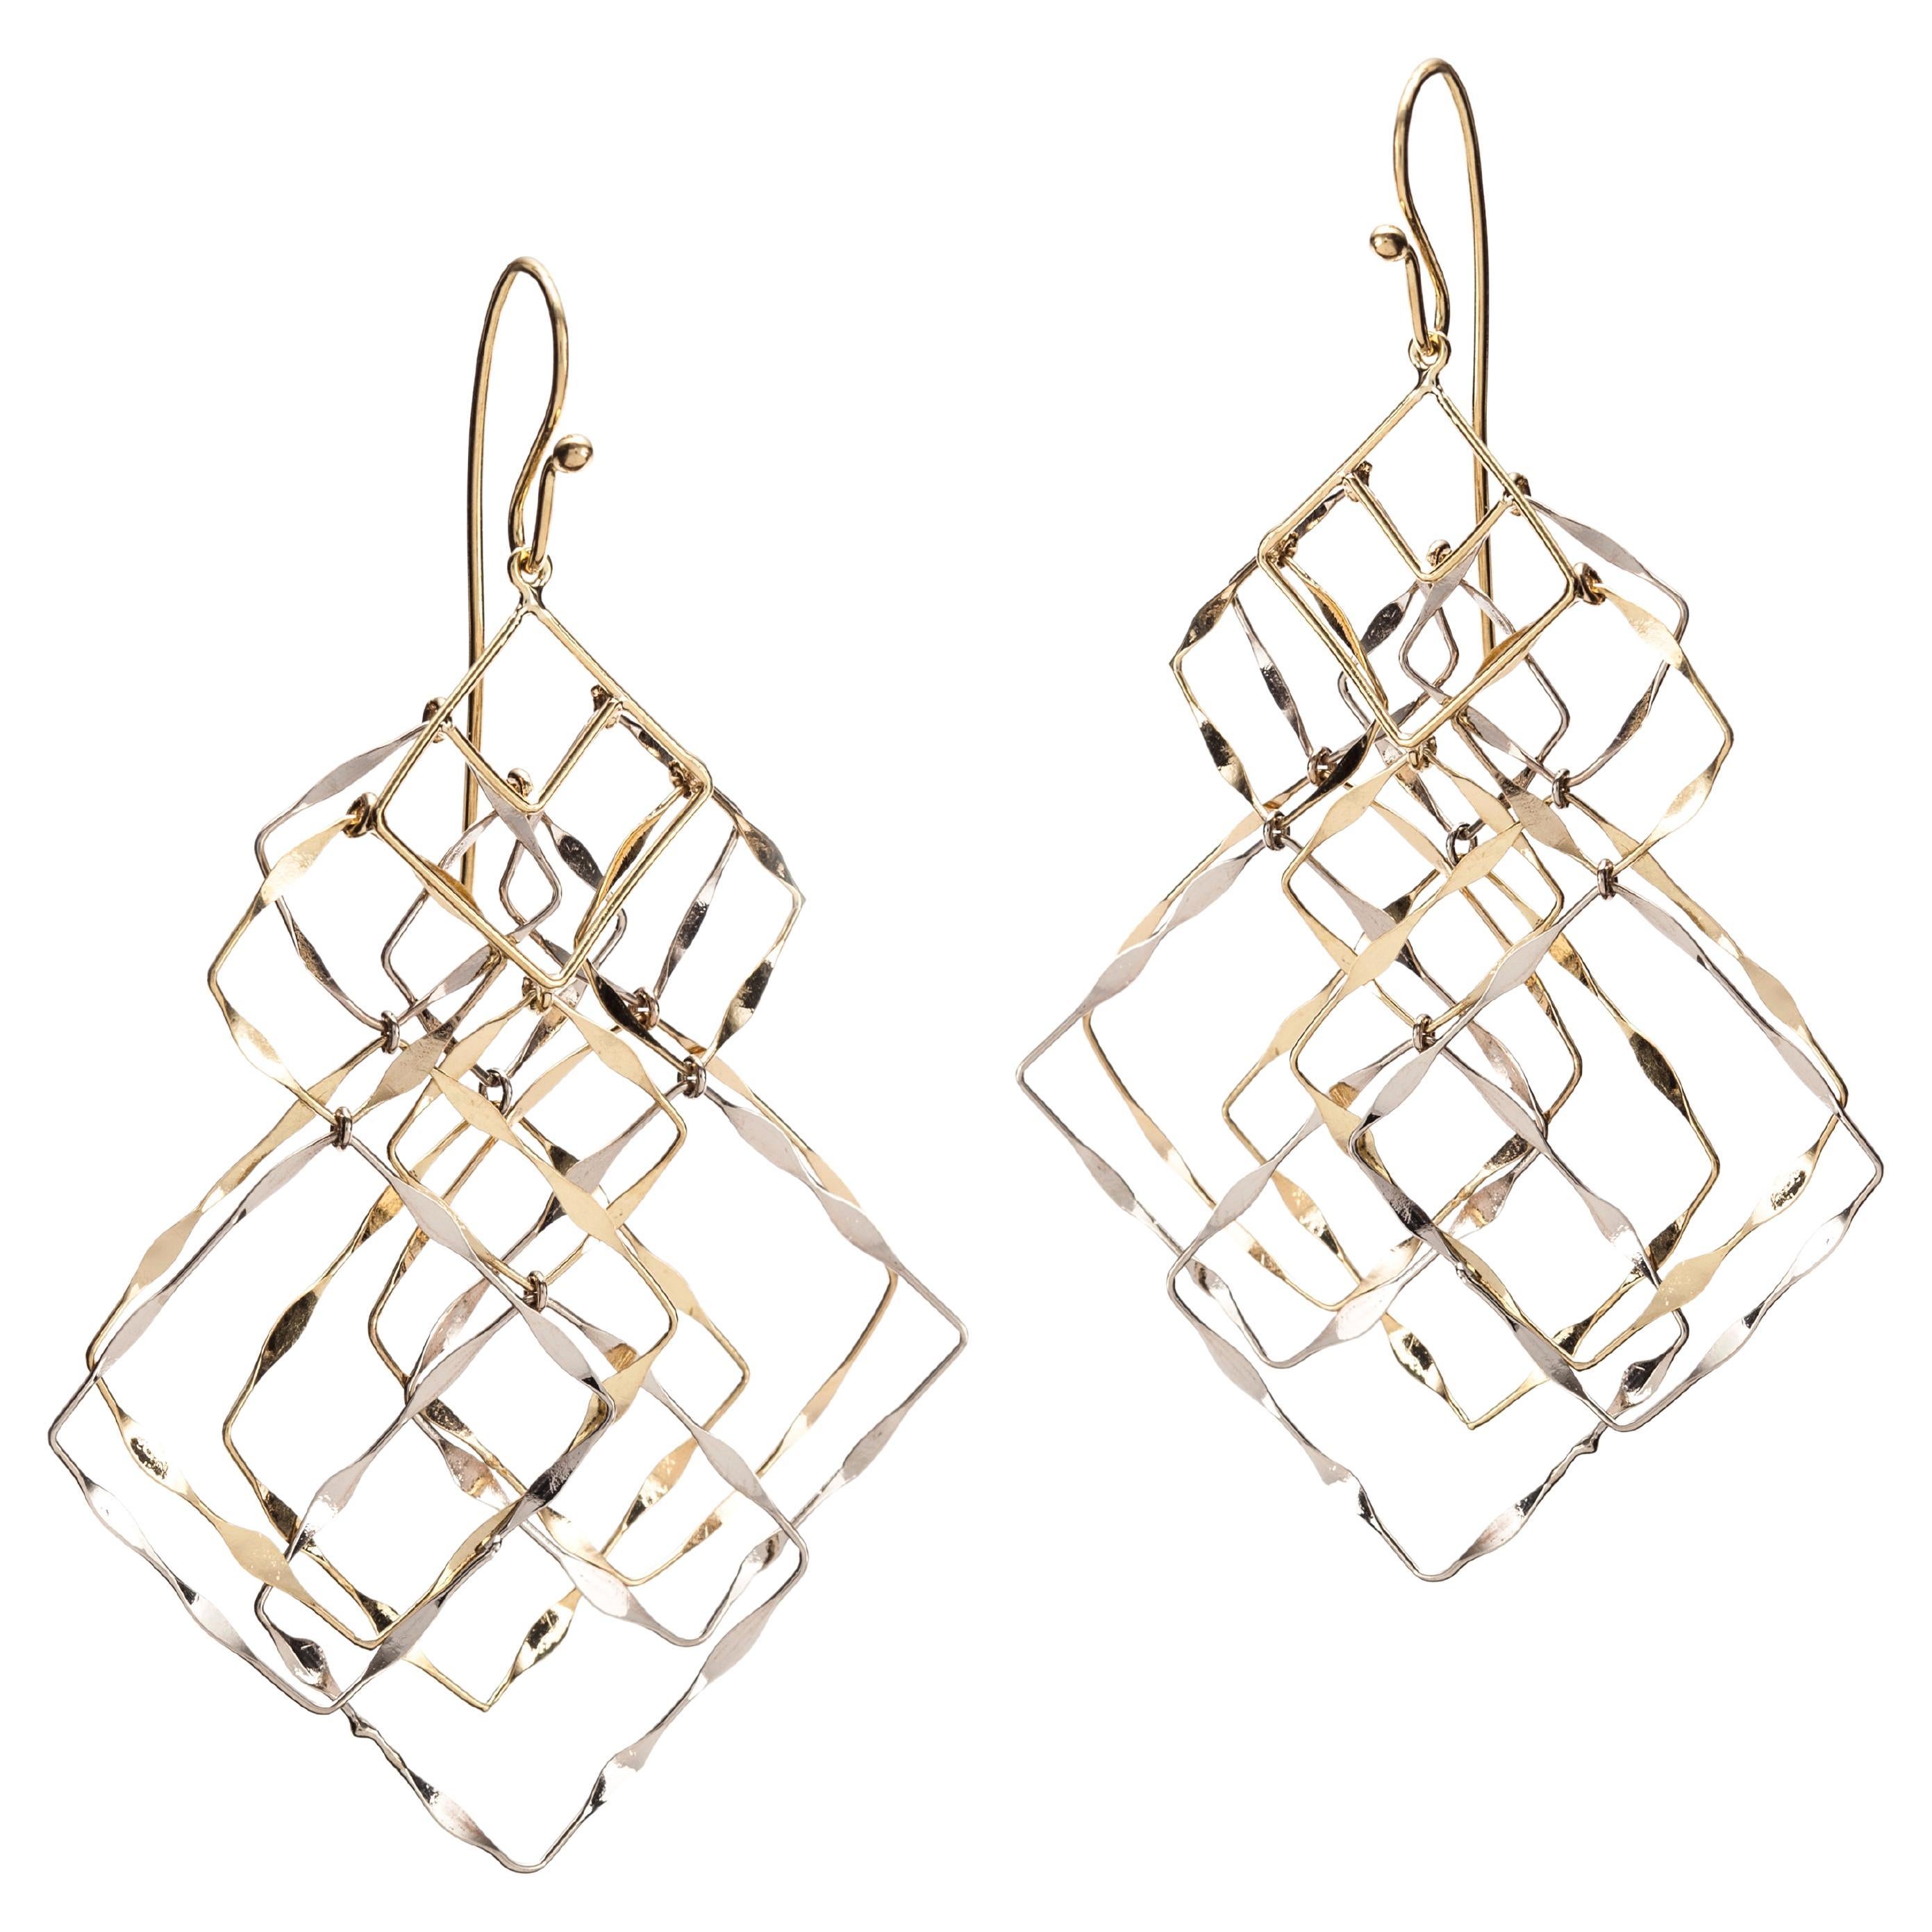 Delicata Earrings in 18k Yellow and White Gold by Serafino For Sale